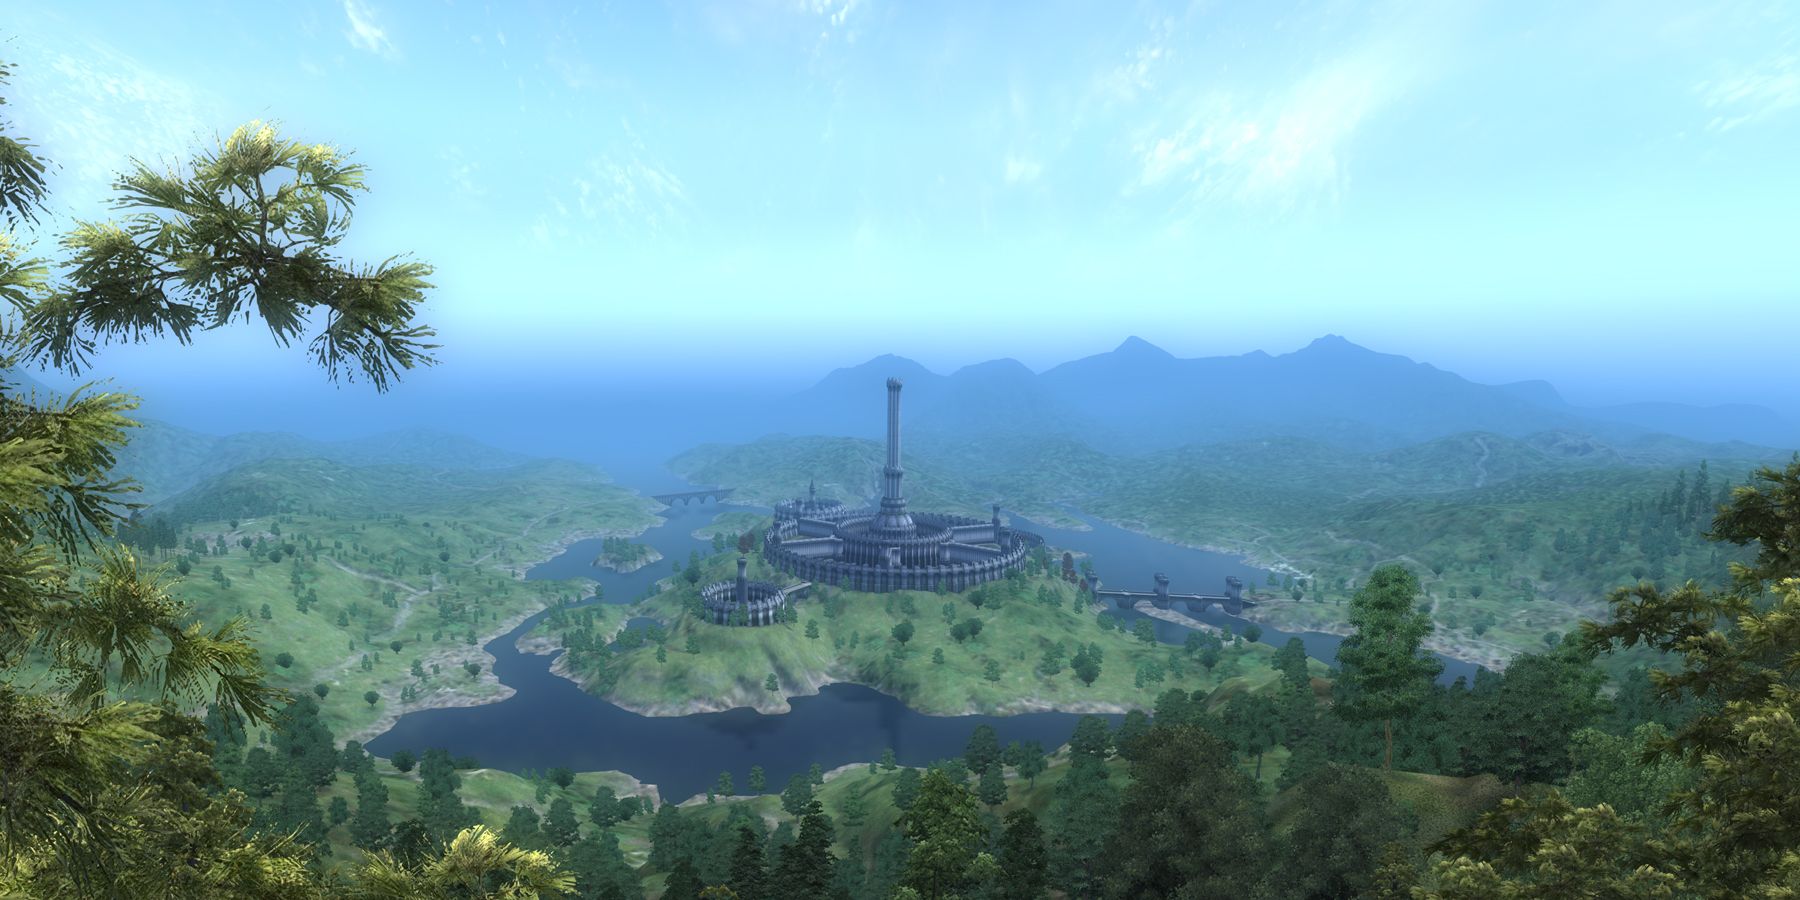 A view of Cyrodiil